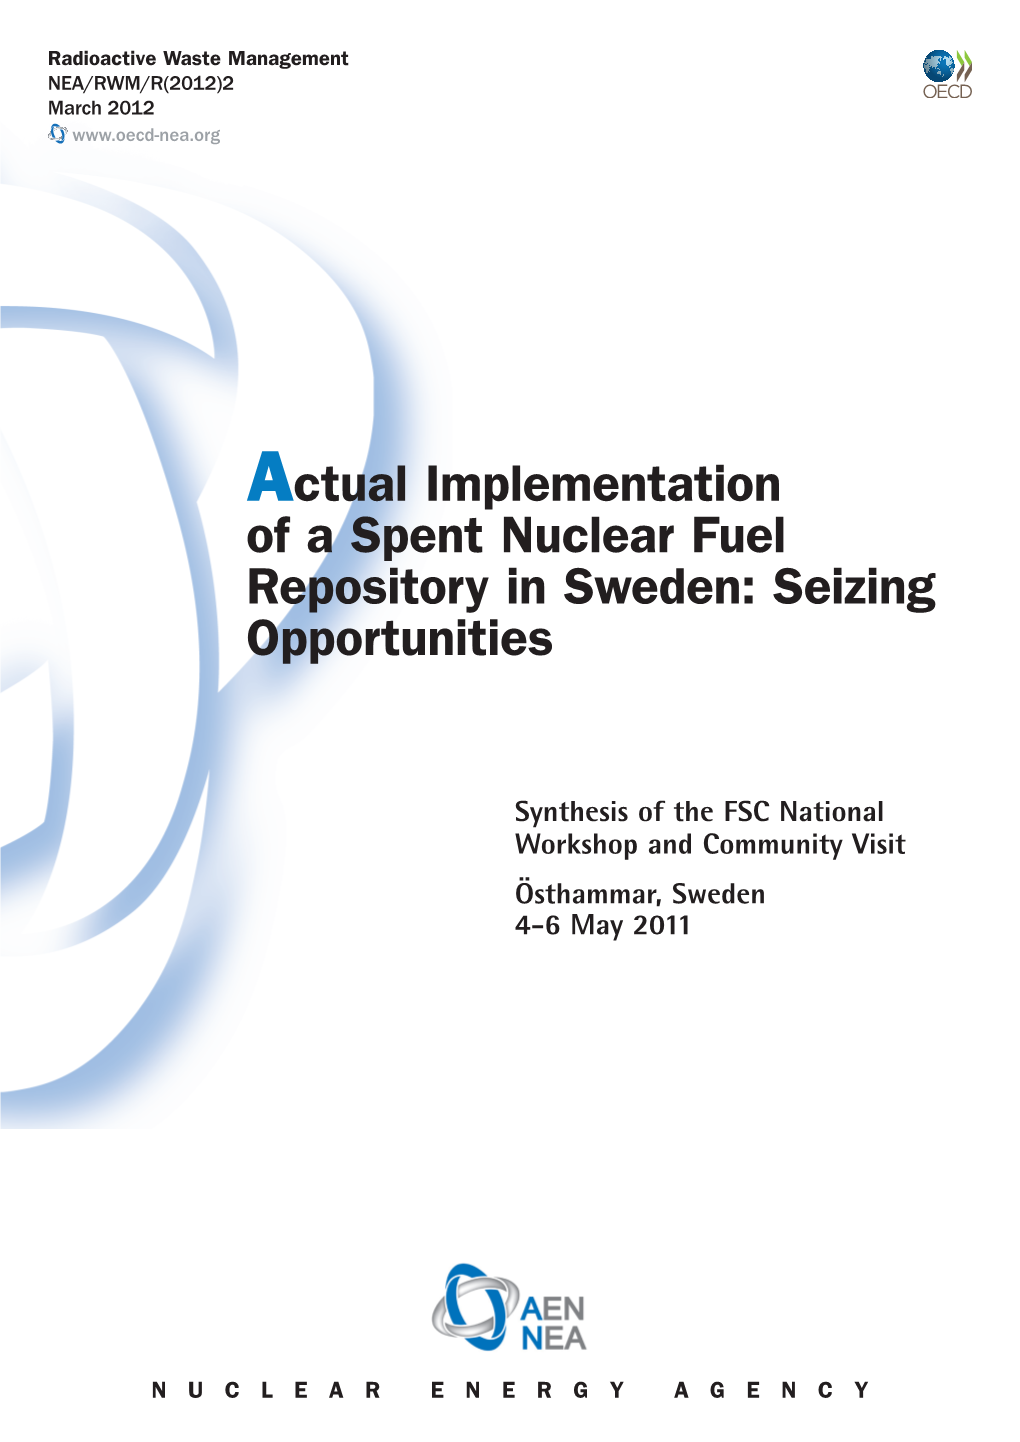 Actual Implementation of a Spent Nuclear Fuel Repository in Sweden: Seizing Opportunities